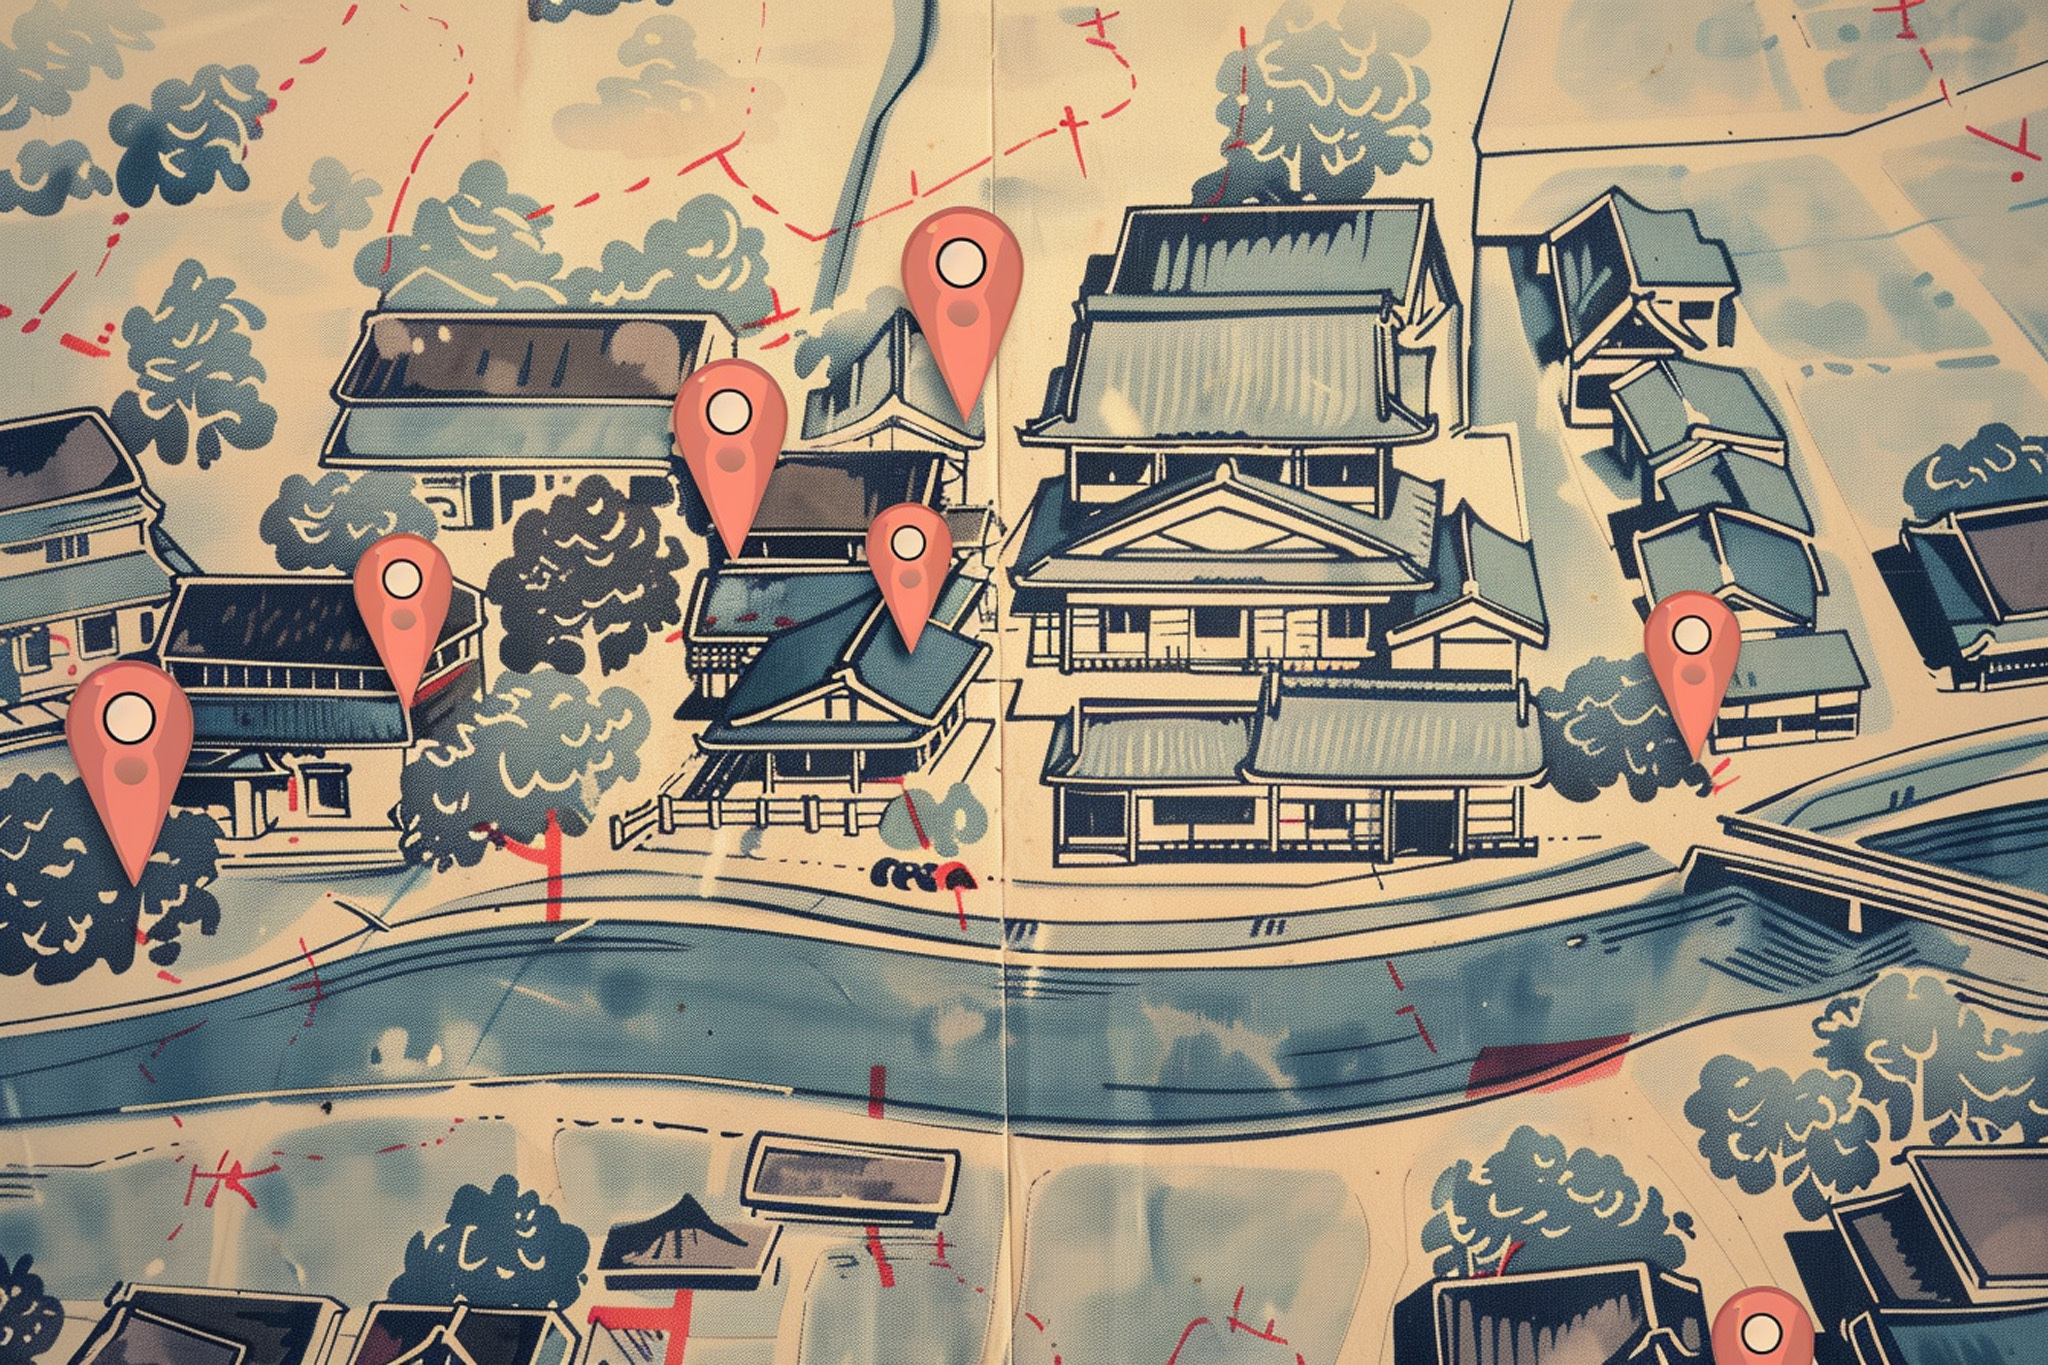 This image shows a detailed map illustration of a town with traditional-style buildings and a river. Several red location markers are placed at various points.